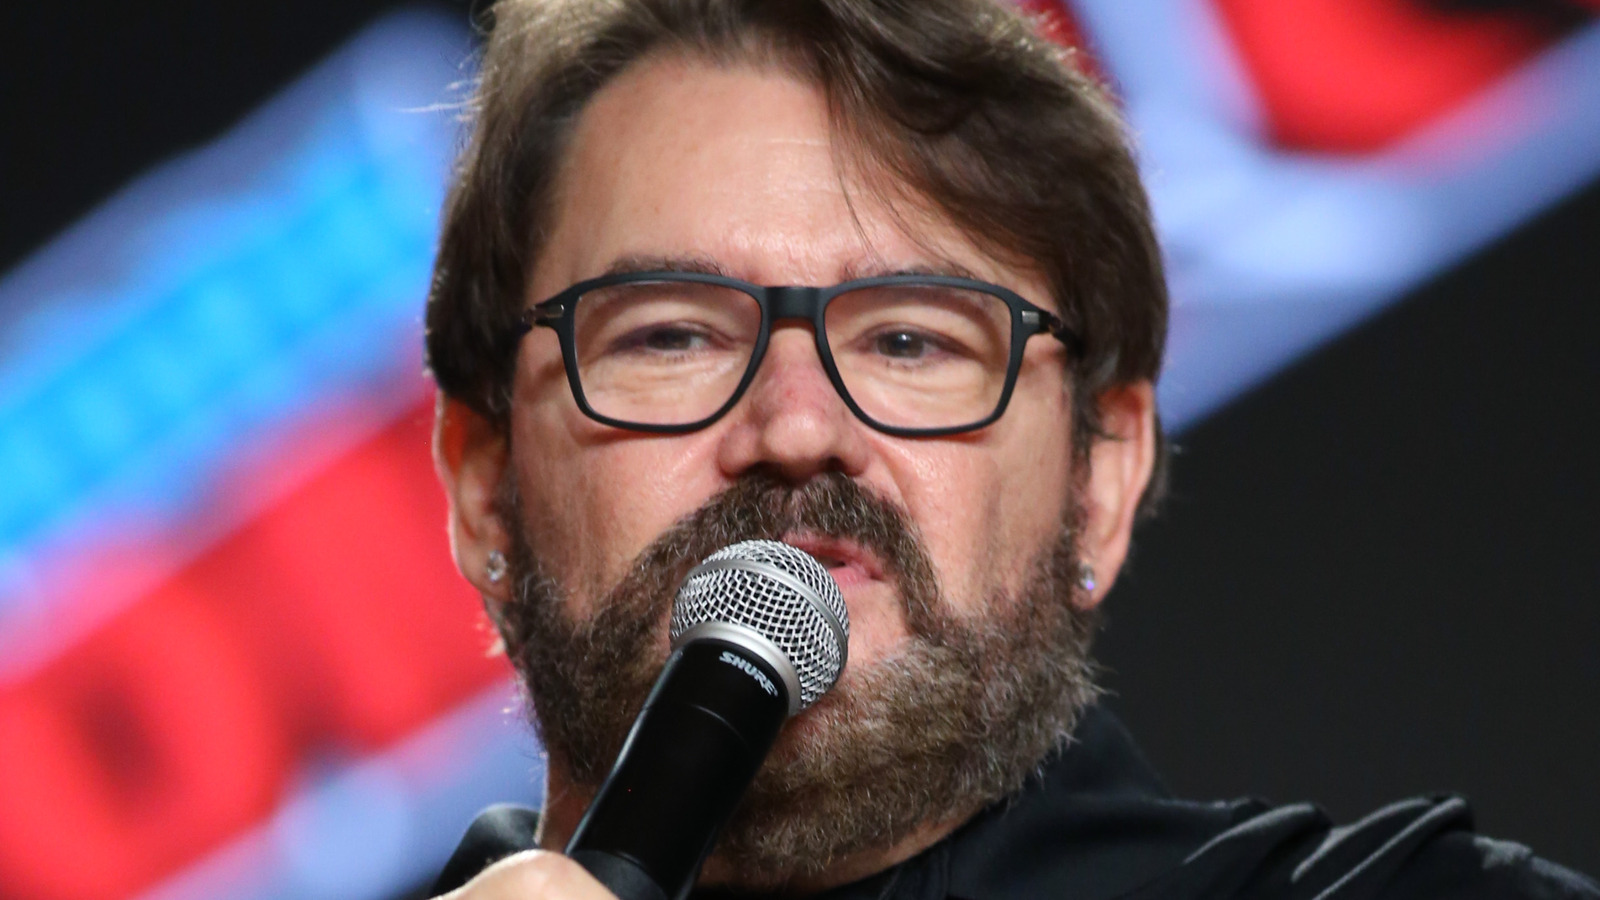 Tony Schiavone Says There's A Place For Blood And Death Matches In Wrestling